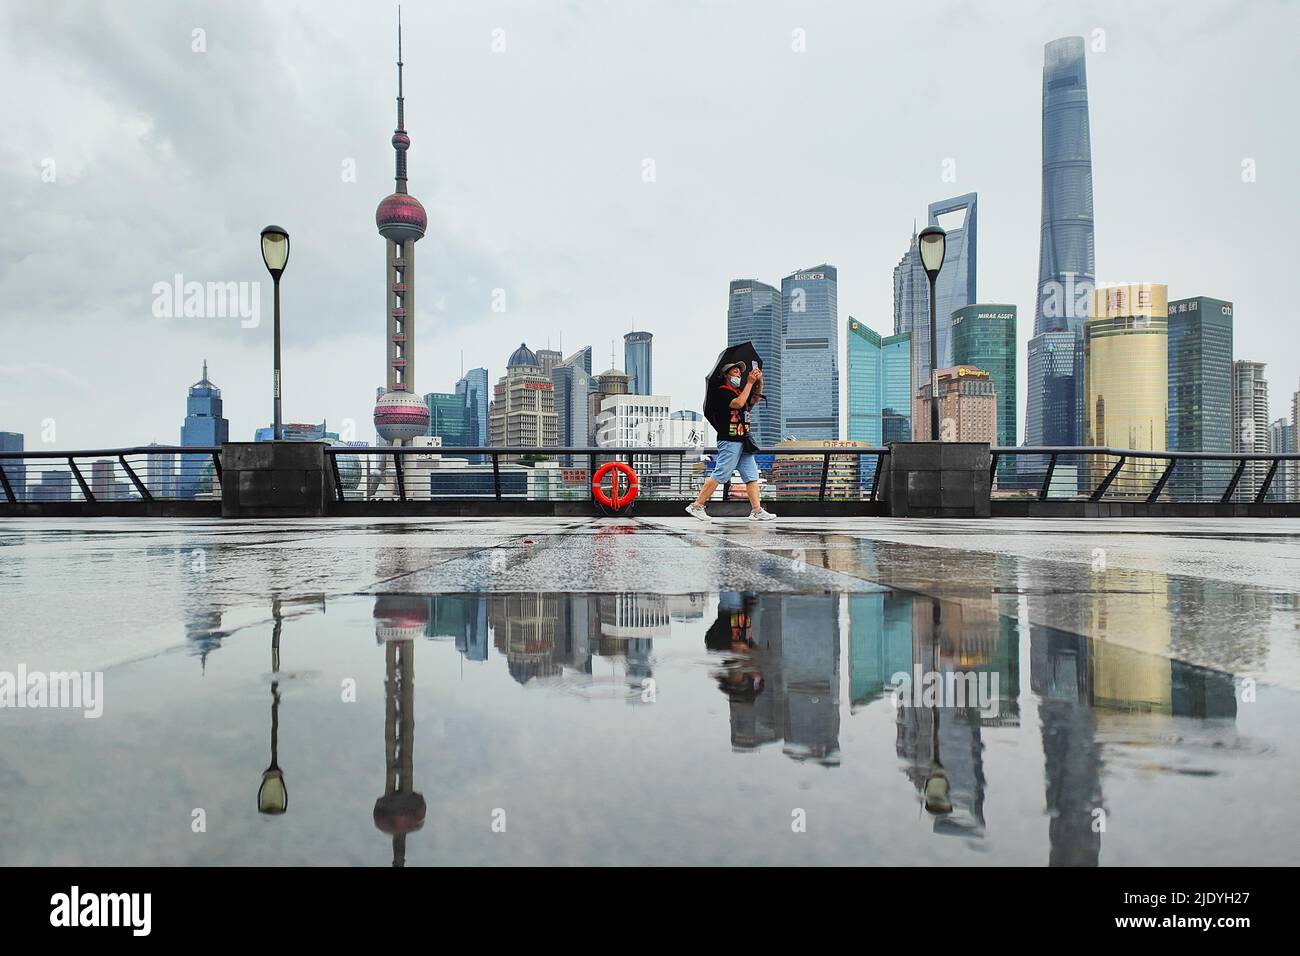 SHANGHAI, CHINA - JUNE 24, 2022 - A tourist holds an umbrella as he passes the Bund in the rain on June 24, 2022 in Shanghai, China. Stock Photo